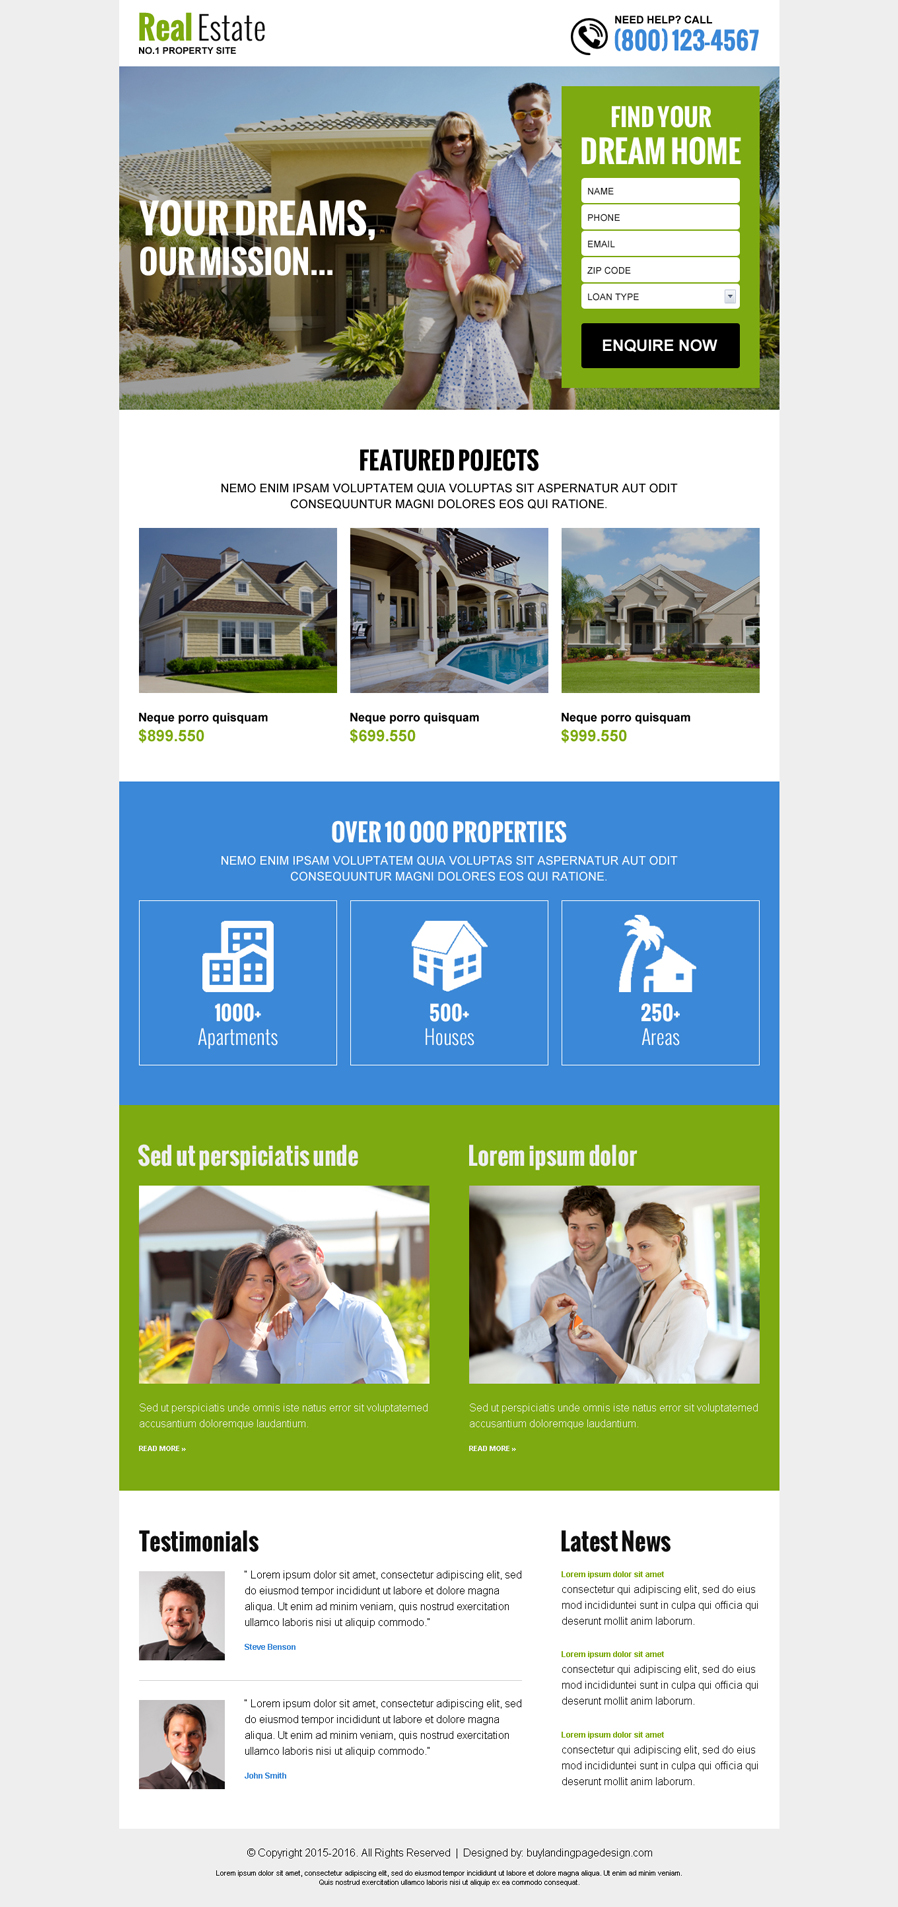 real-estate-free-quote-service-lead-gen-converting-landing-page-design-013